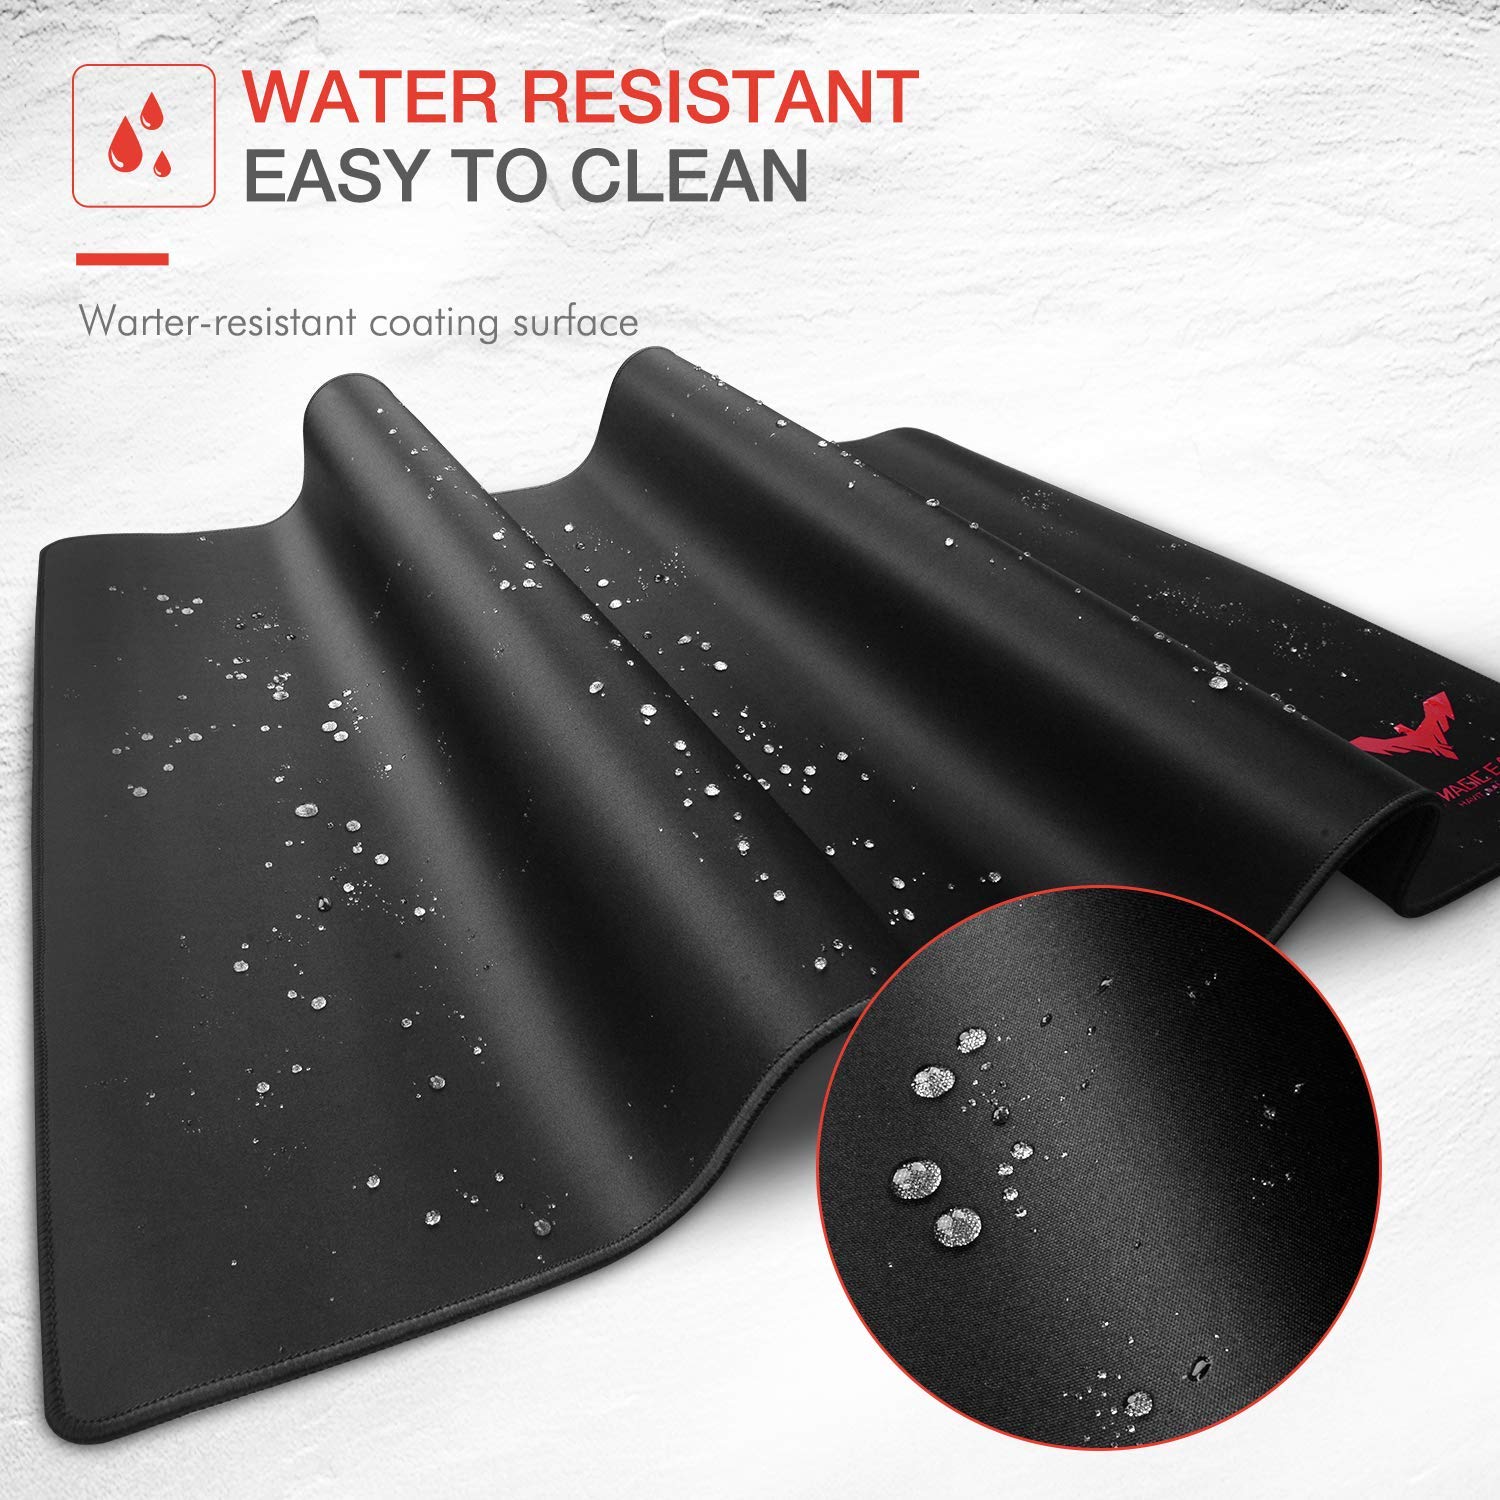 HAVIT MP857 Large Mouse Pad / Mat with Water Resistant & Non-Slip Rubber Base